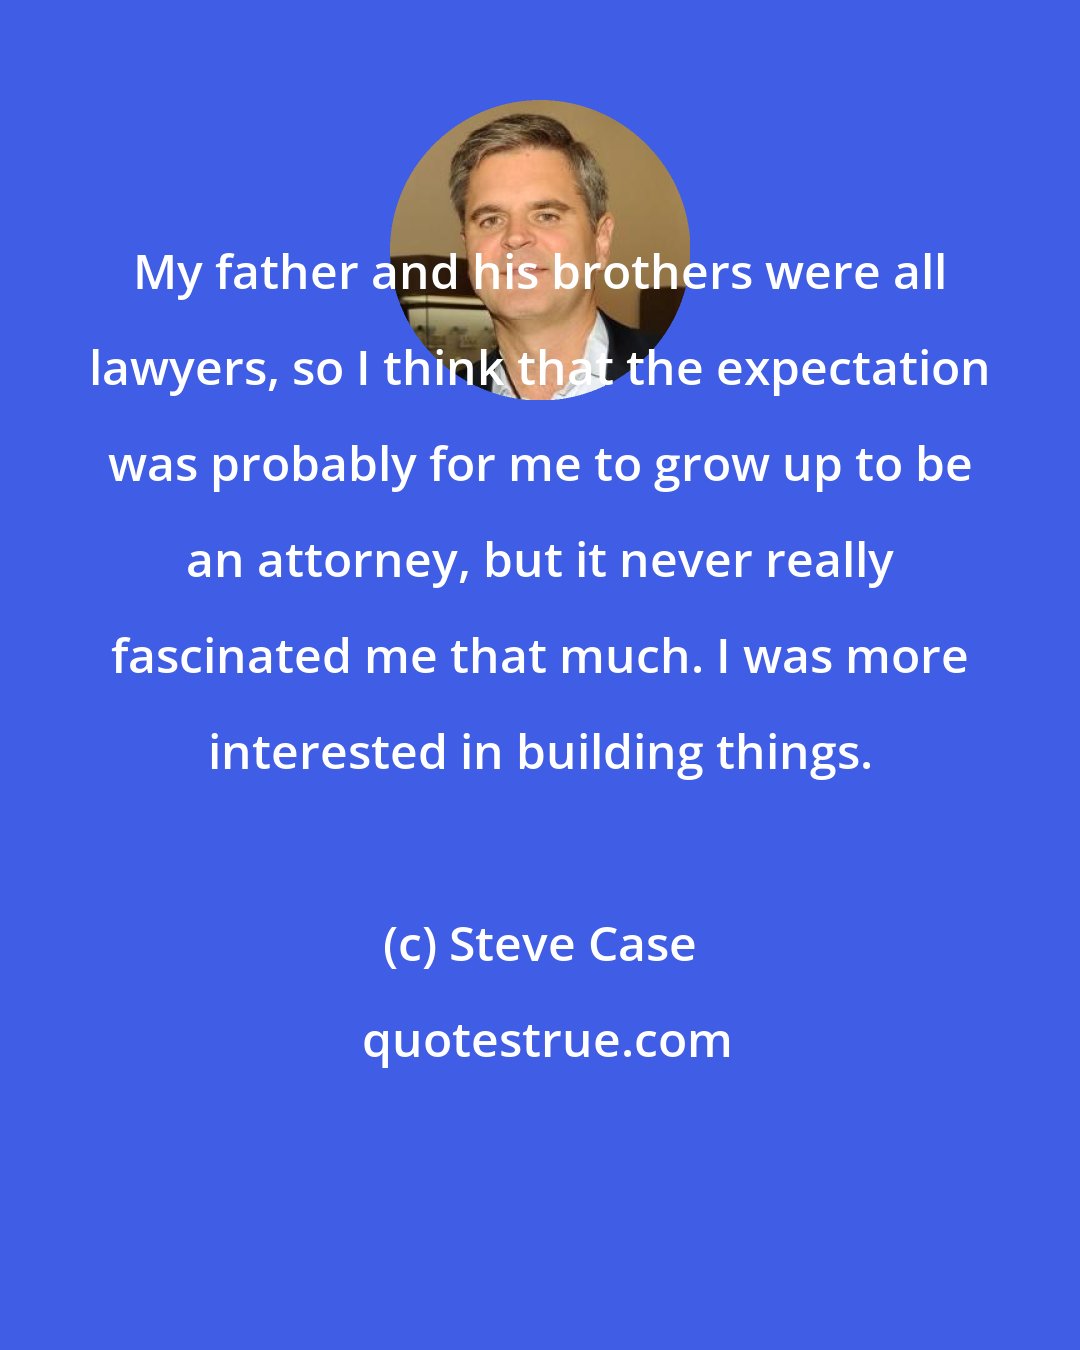 Steve Case: My father and his brothers were all lawyers, so I think that the expectation was probably for me to grow up to be an attorney, but it never really fascinated me that much. I was more interested in building things.